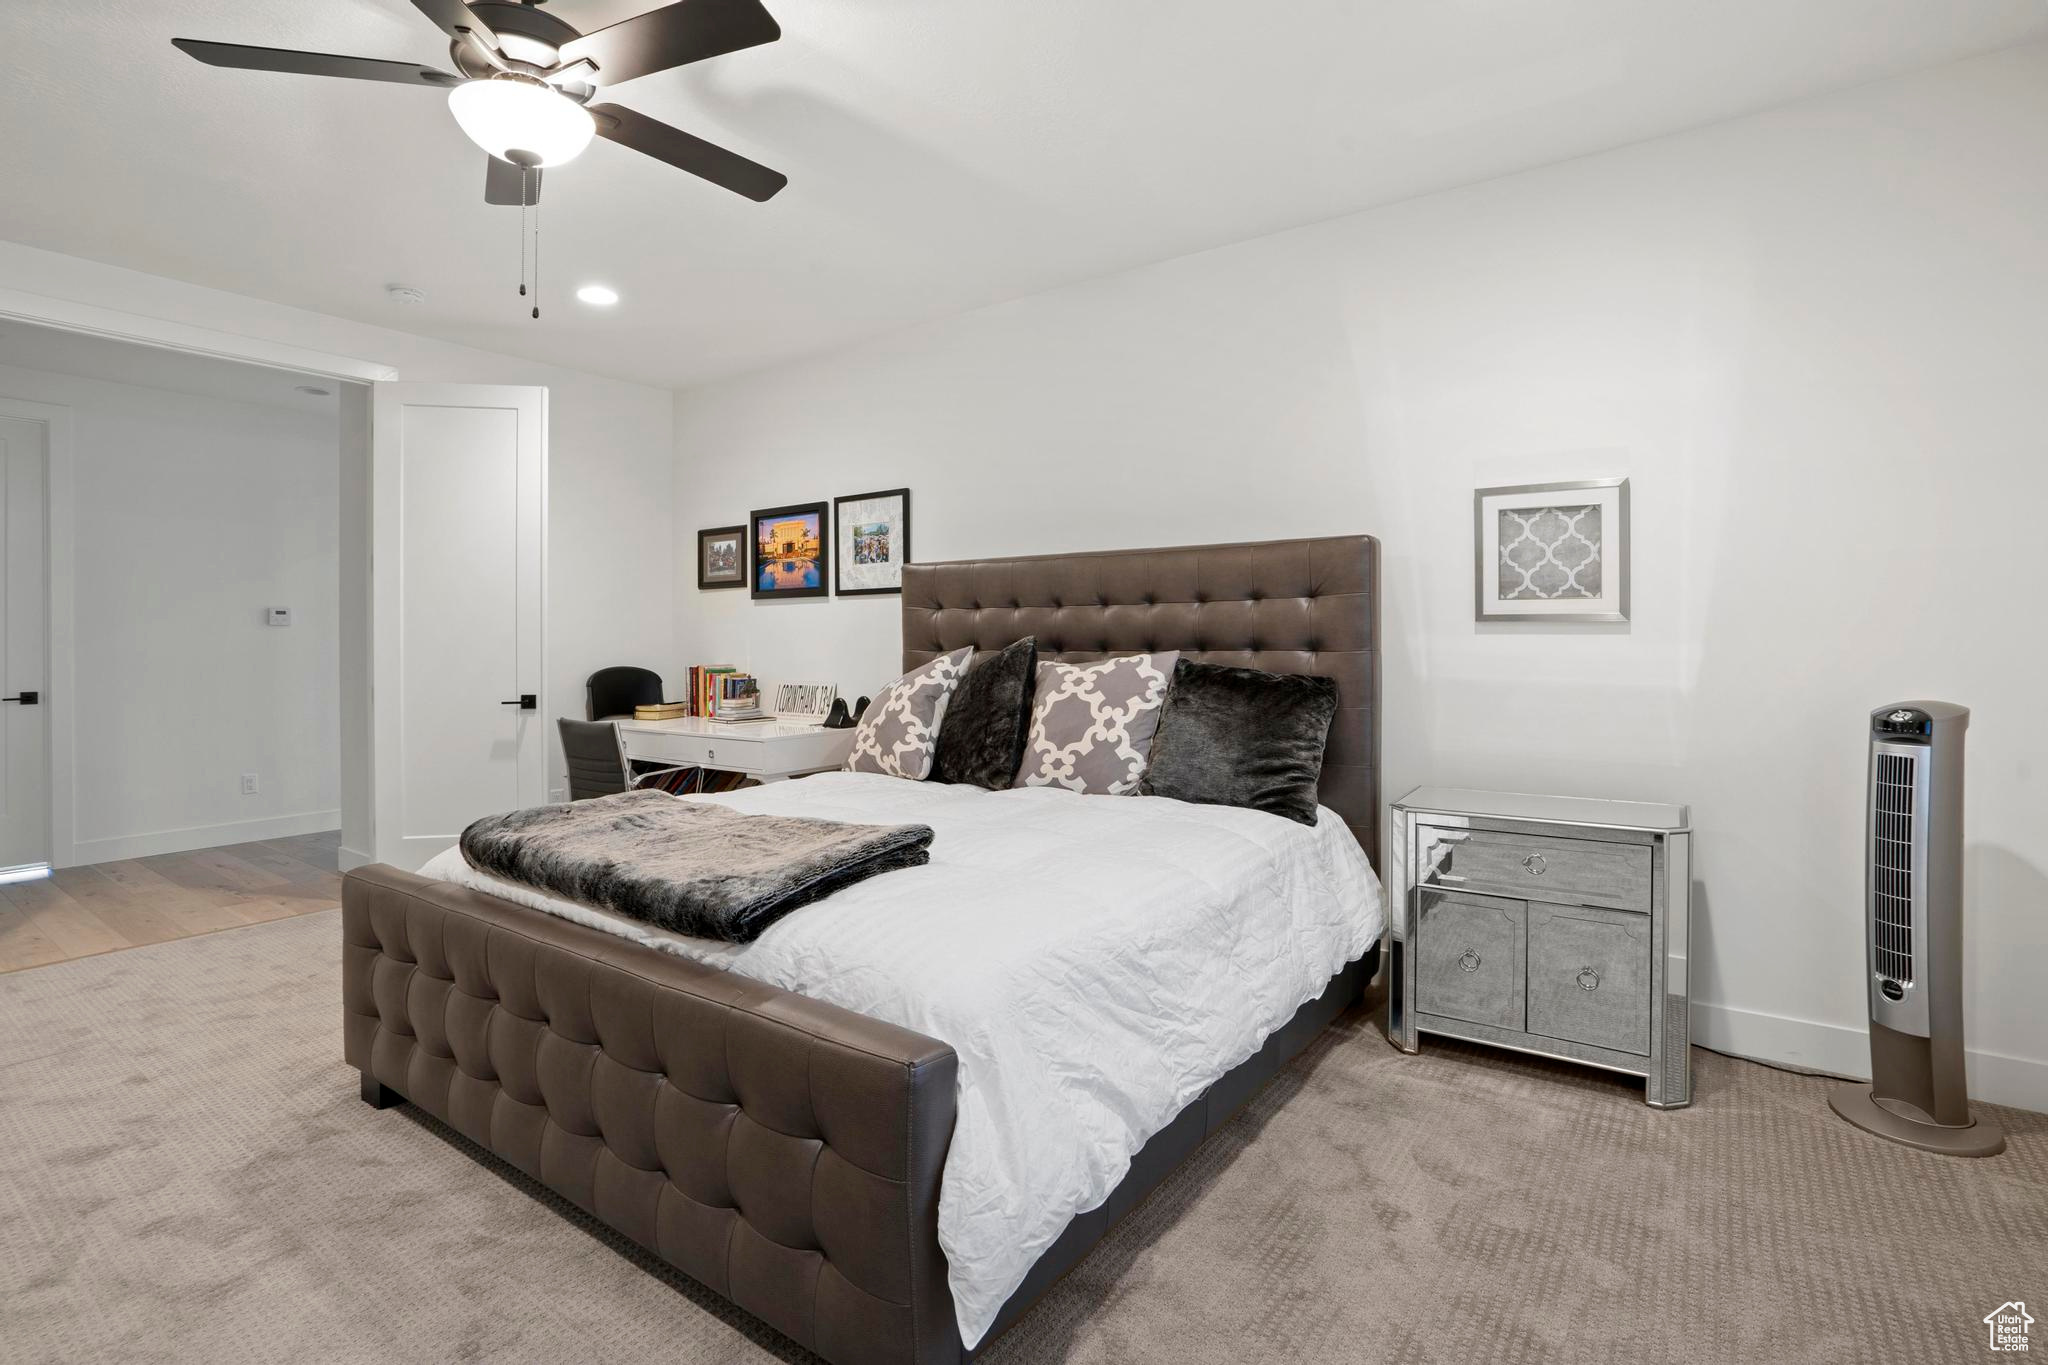 Bedroom featuring light colored carpet and ceiling fan